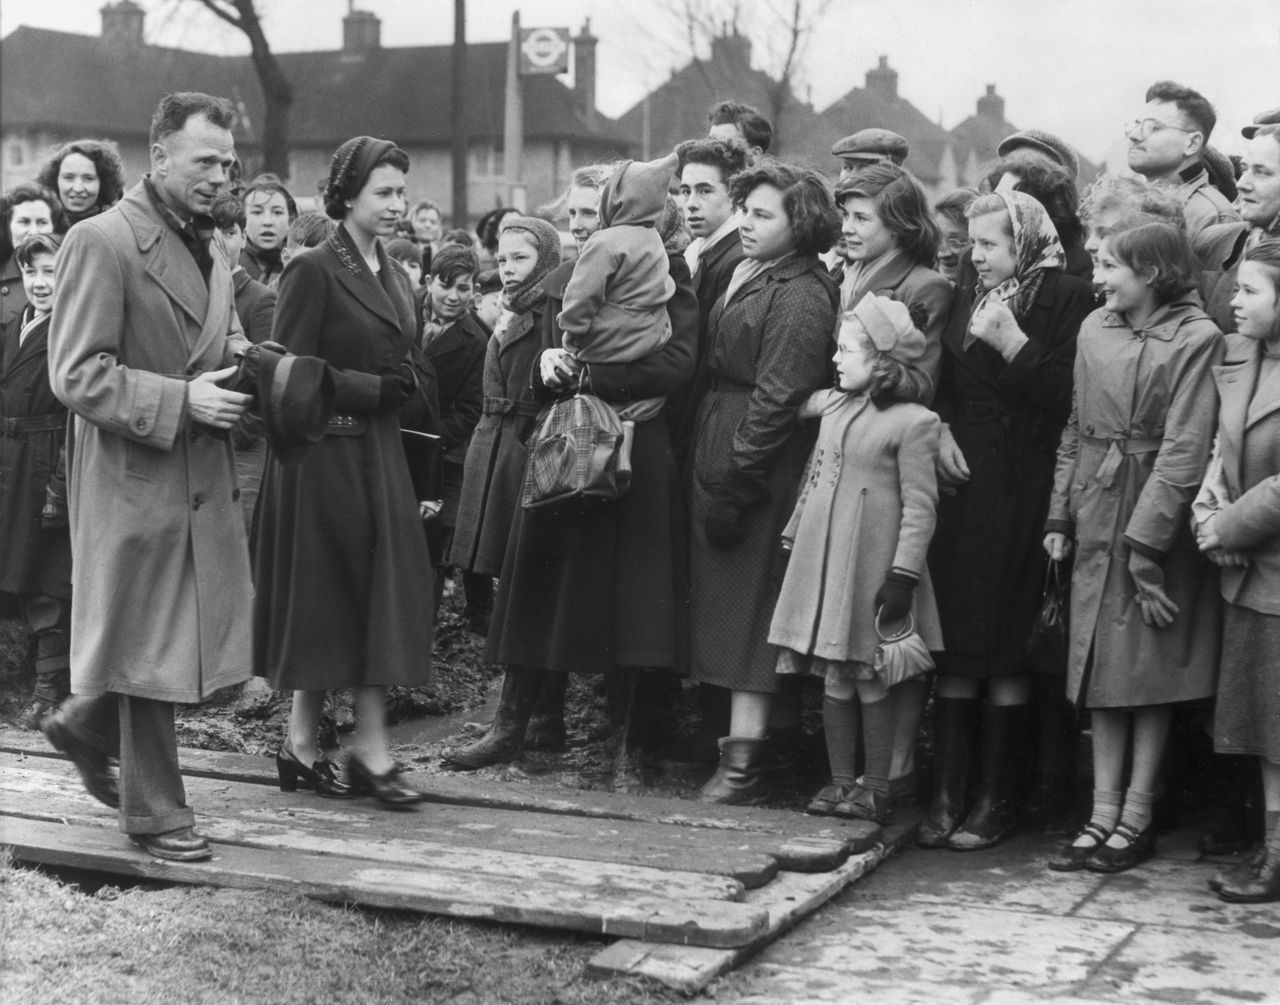 Queen Elizabeth II visits Tilbury after the flood in February 1953.